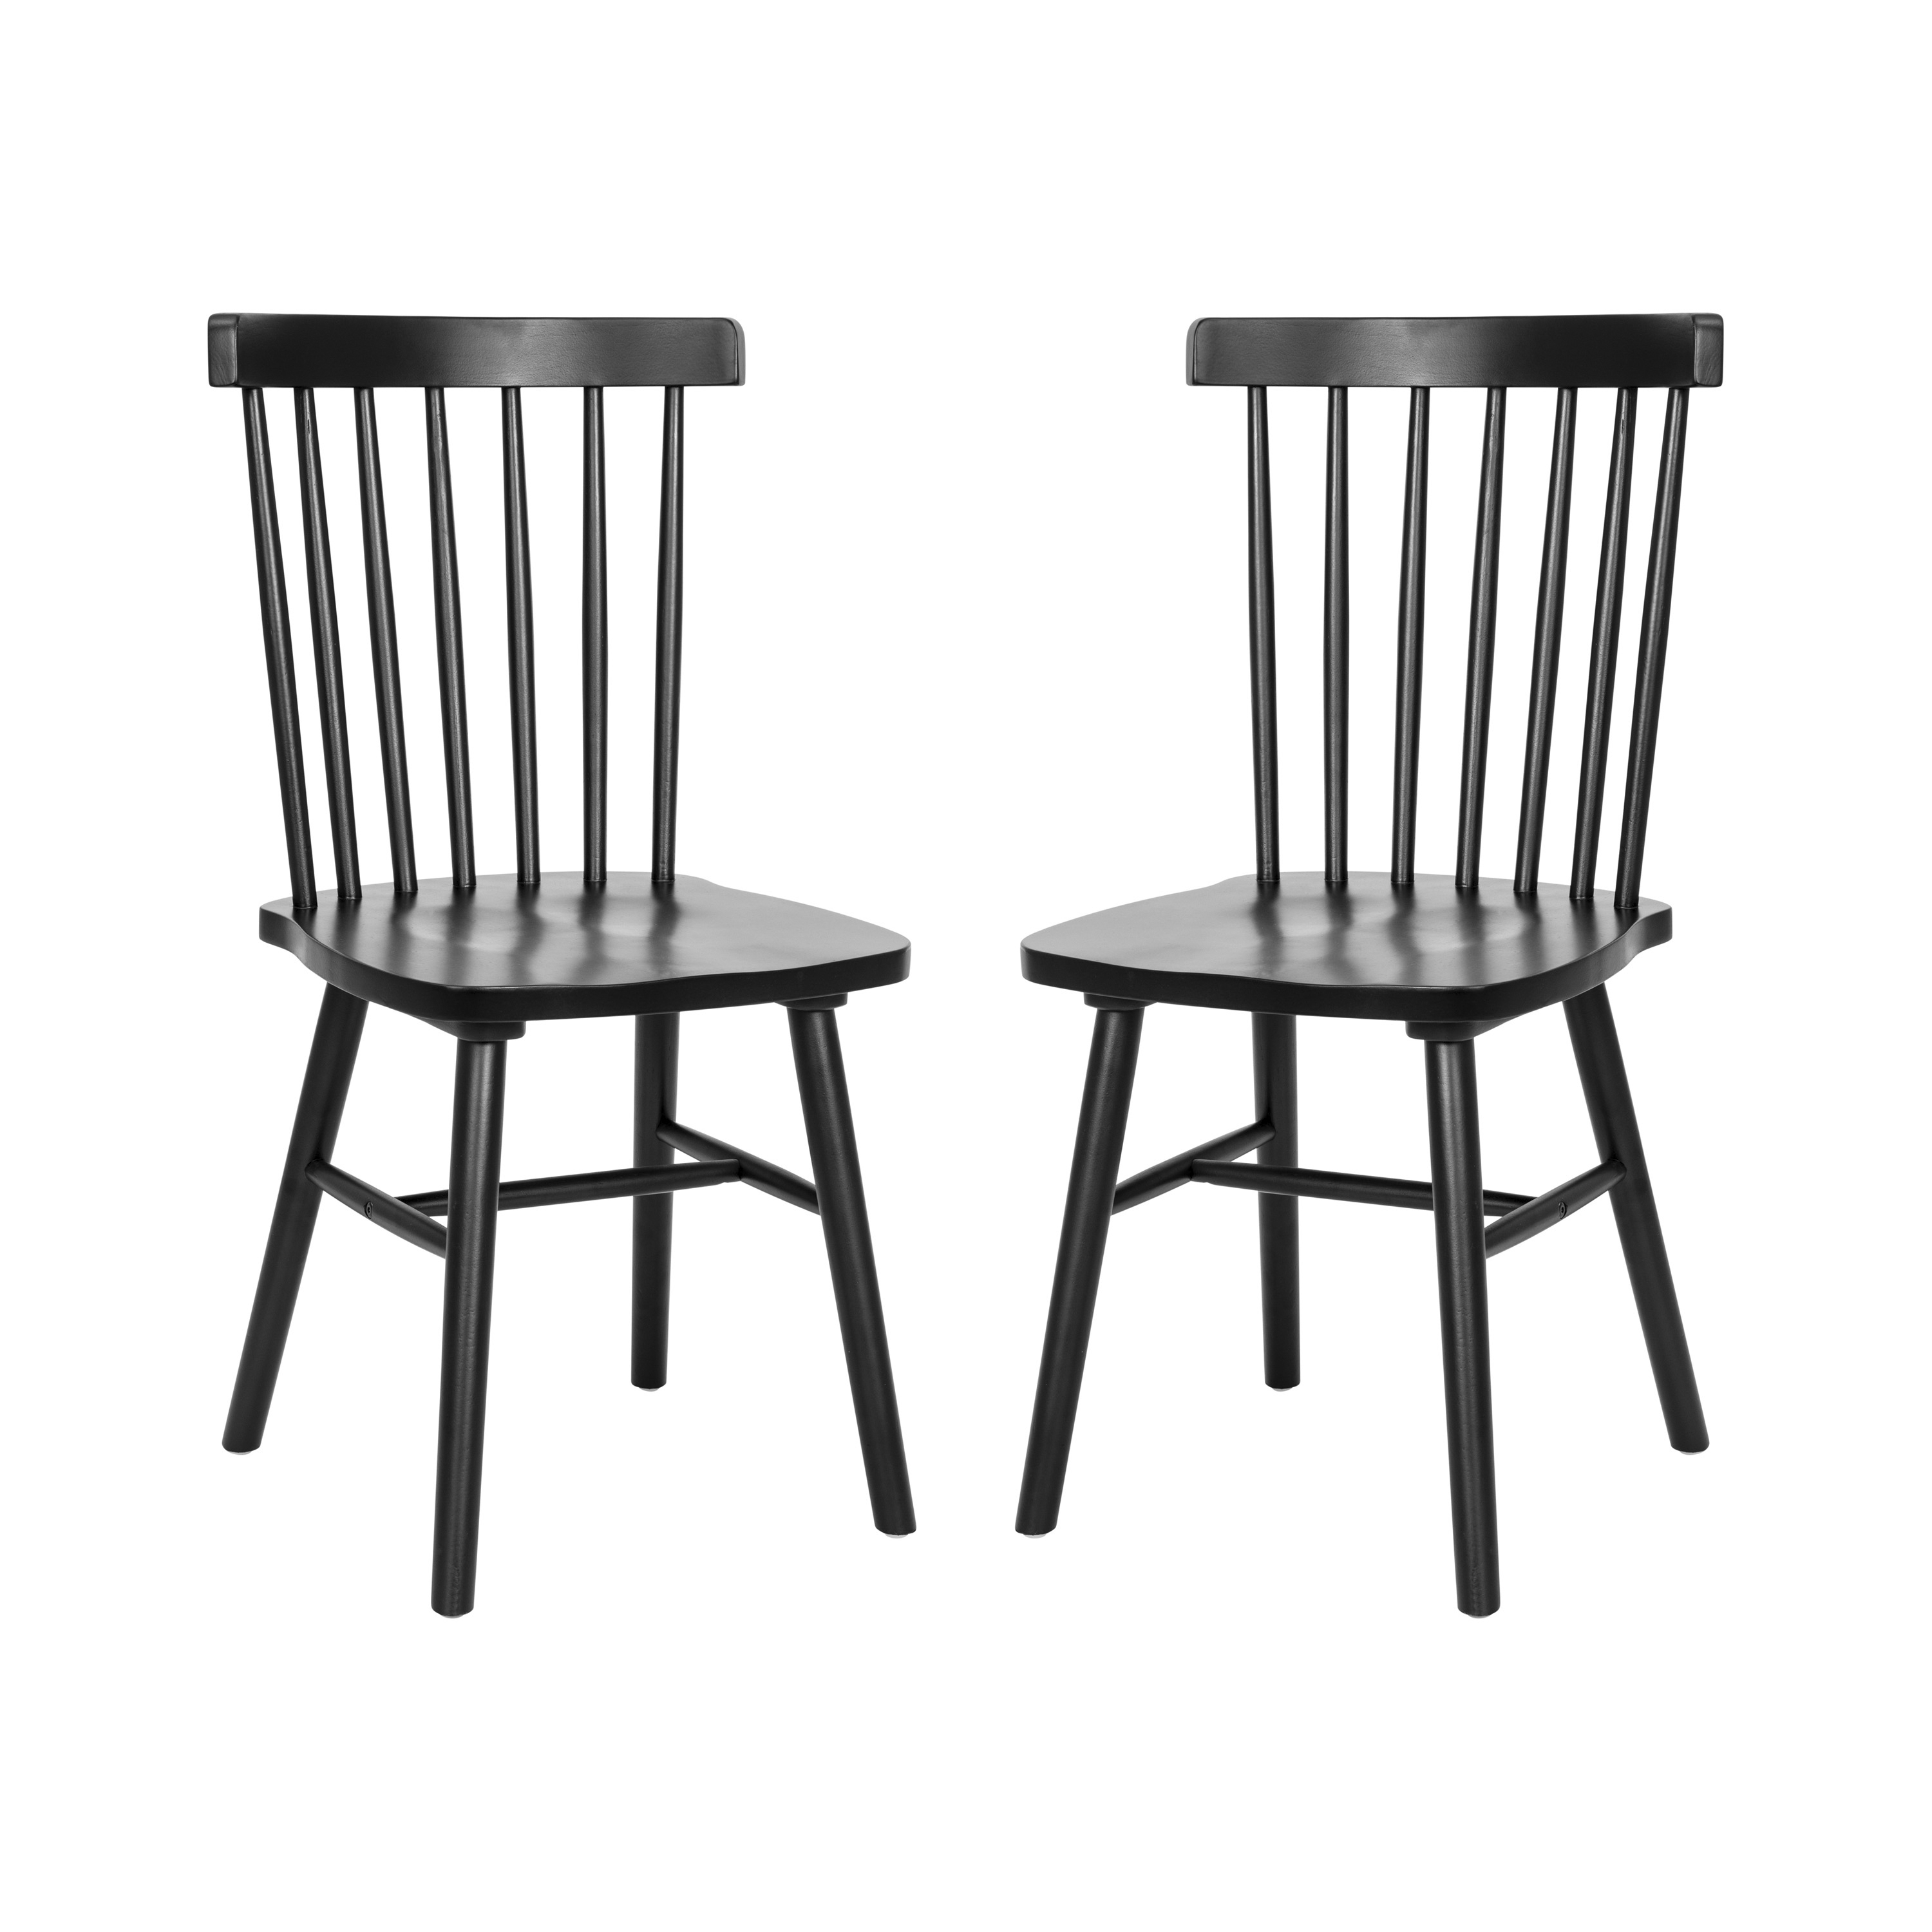 Flash Furniture ZH-8101WR-BK-2-GG Commercial Black Wood Armless Spindle Back Chairs, Set of 2